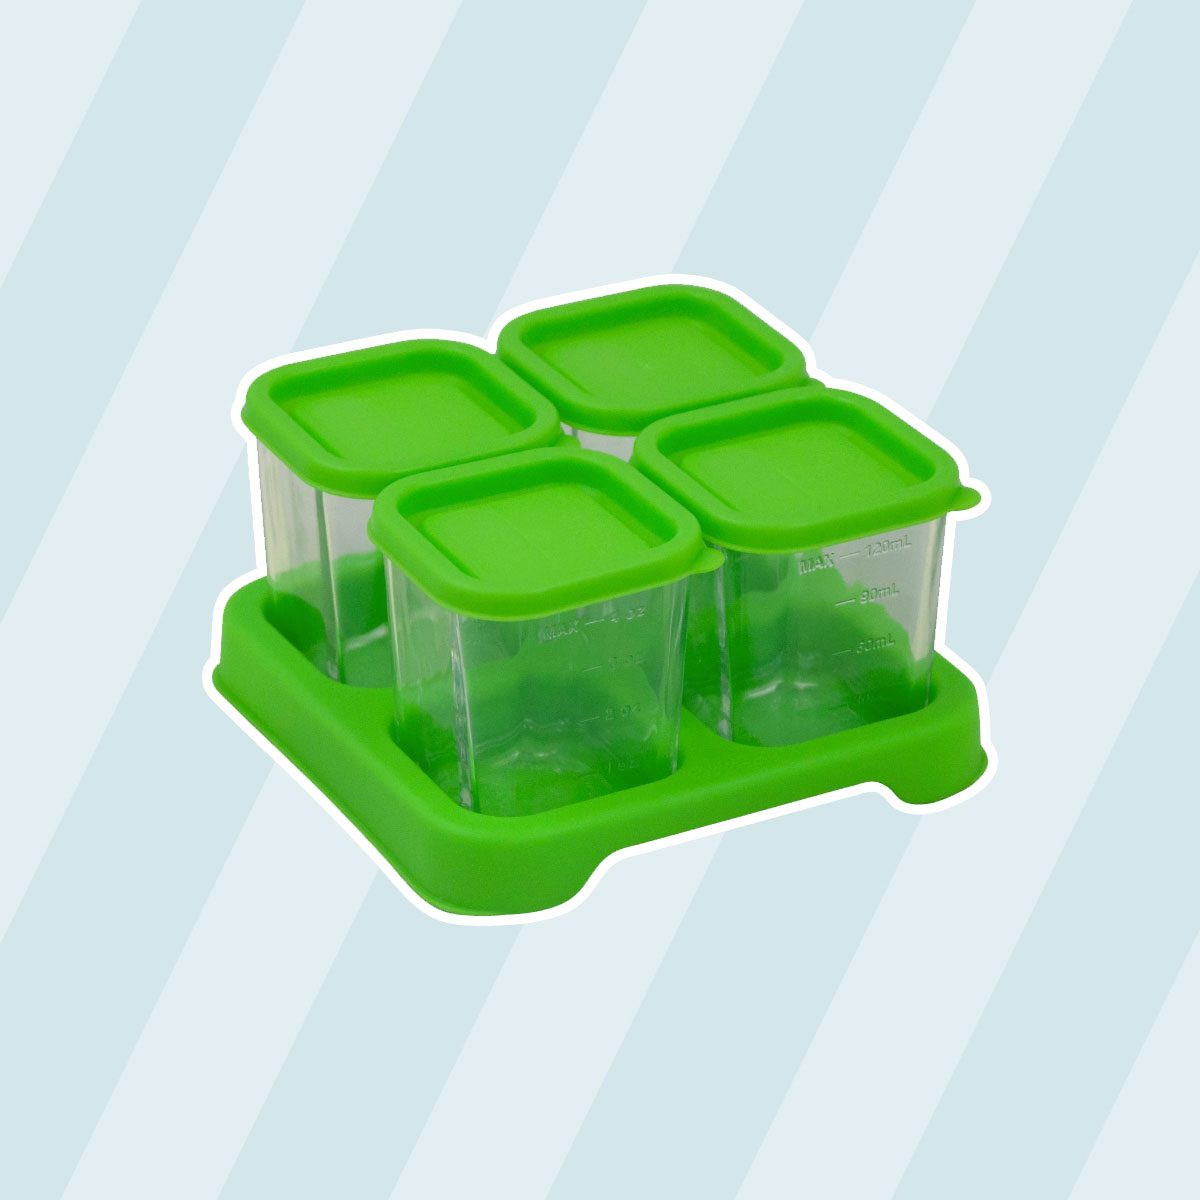 10-Piece Baby Food Maker Set with Glass Baby Food Containers - Sage  Spoonfuls